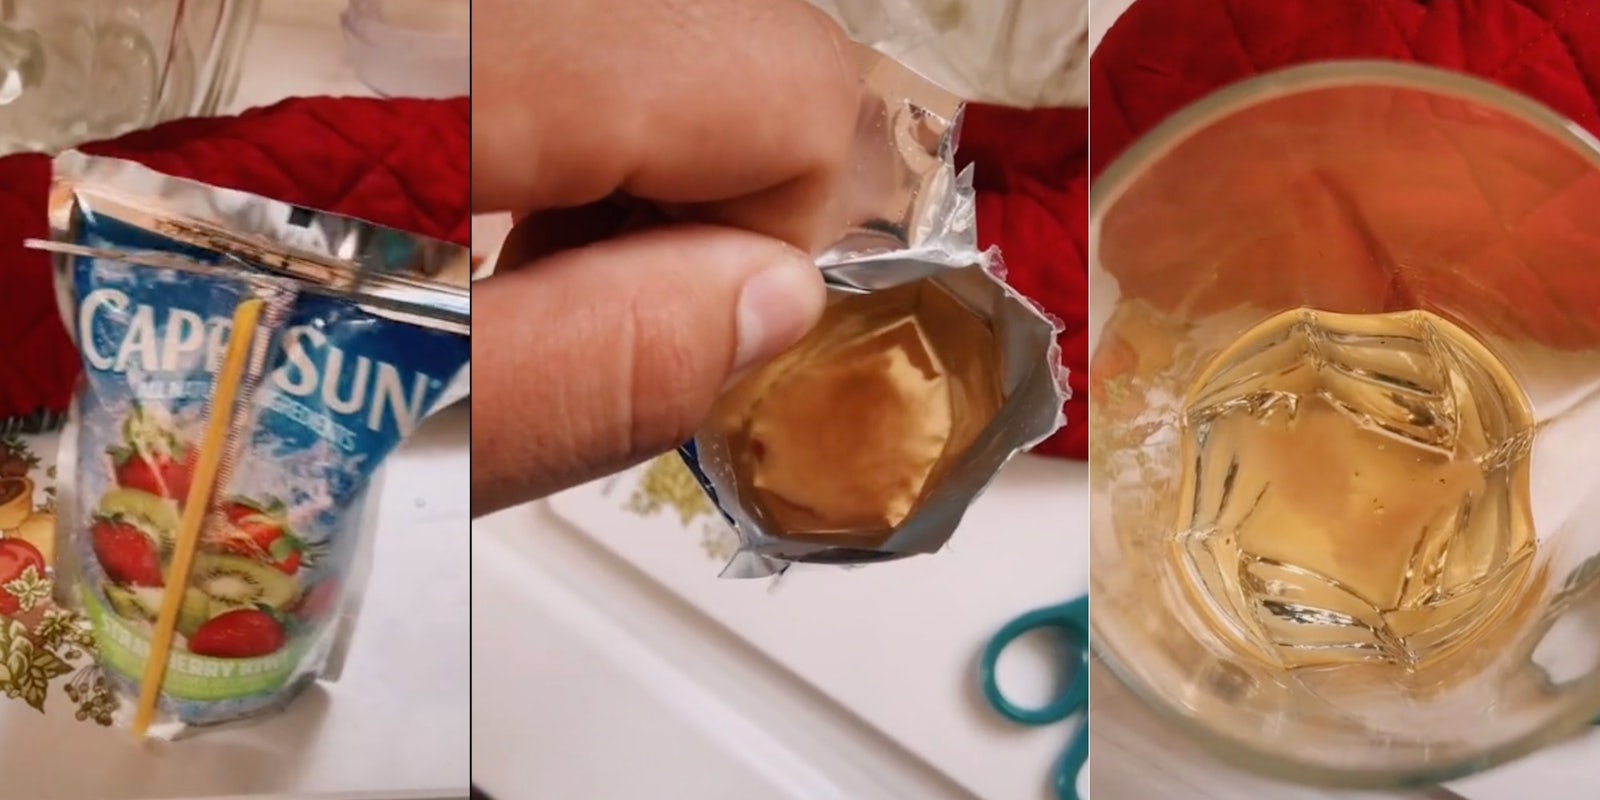 cutting open a new pouch of caprisun, opening caprisun to see mold, dumping juice in a cup with mold